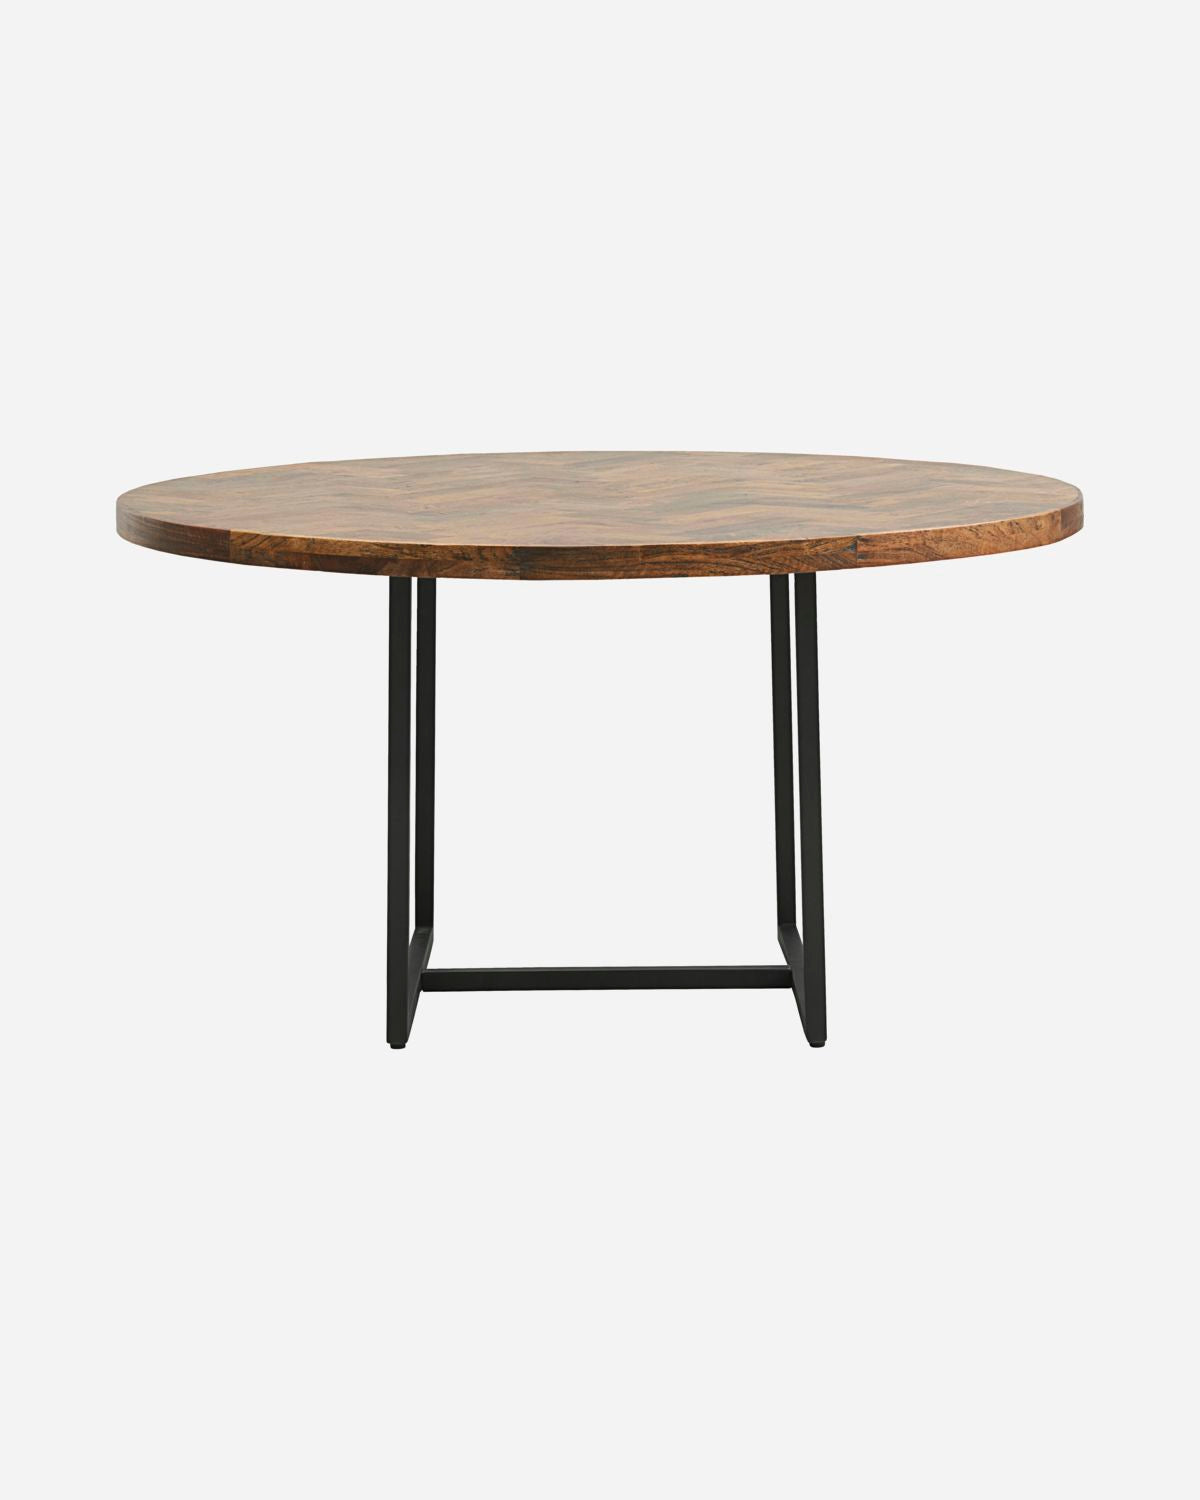 Dining table, Kant